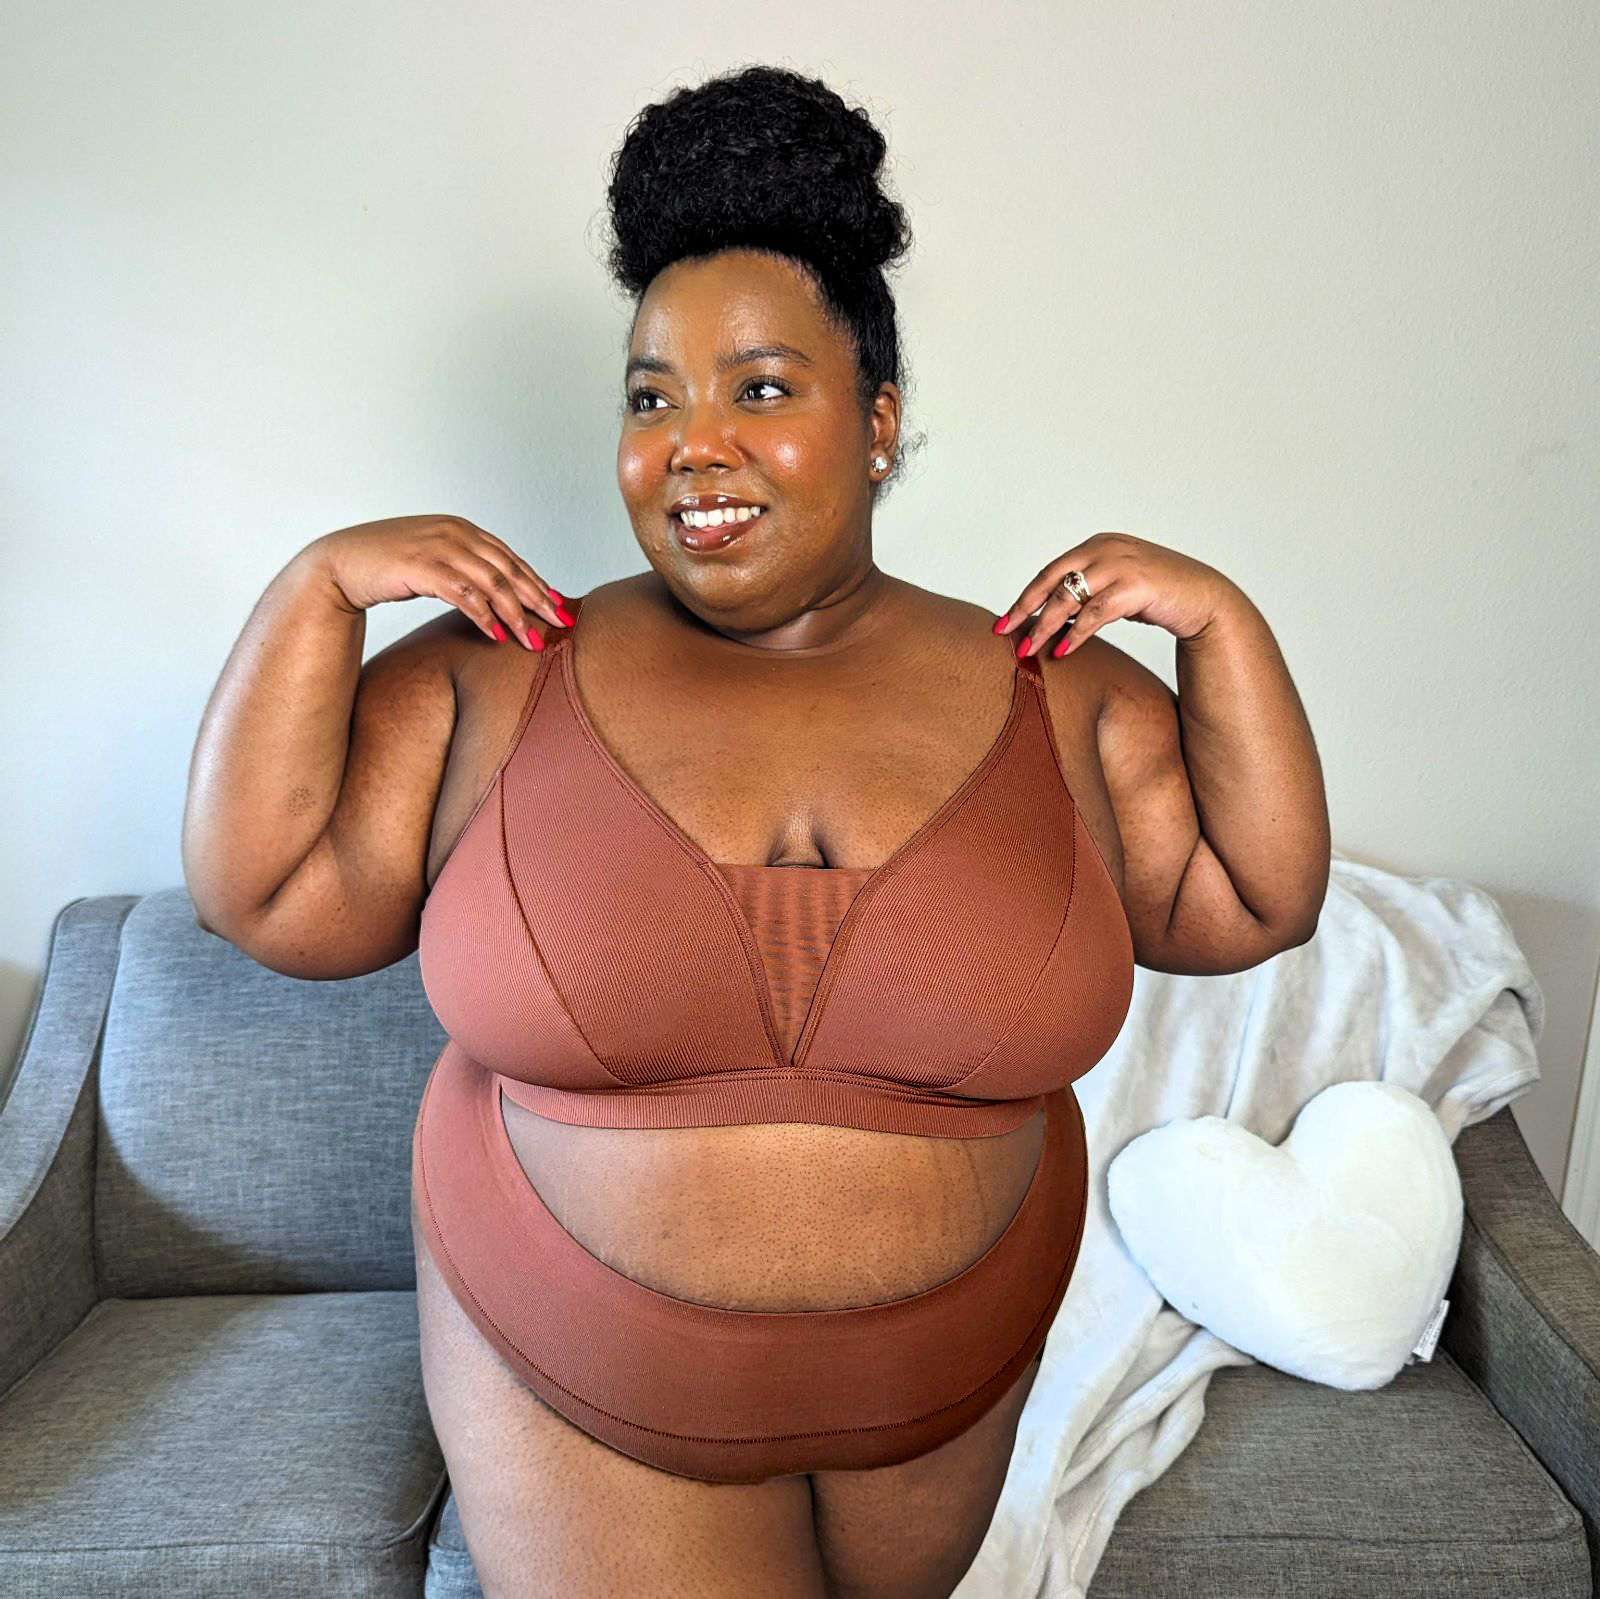 Snag our best-selling Cotton Wireless Bra for ONLY $7.99 - OneStopPlus